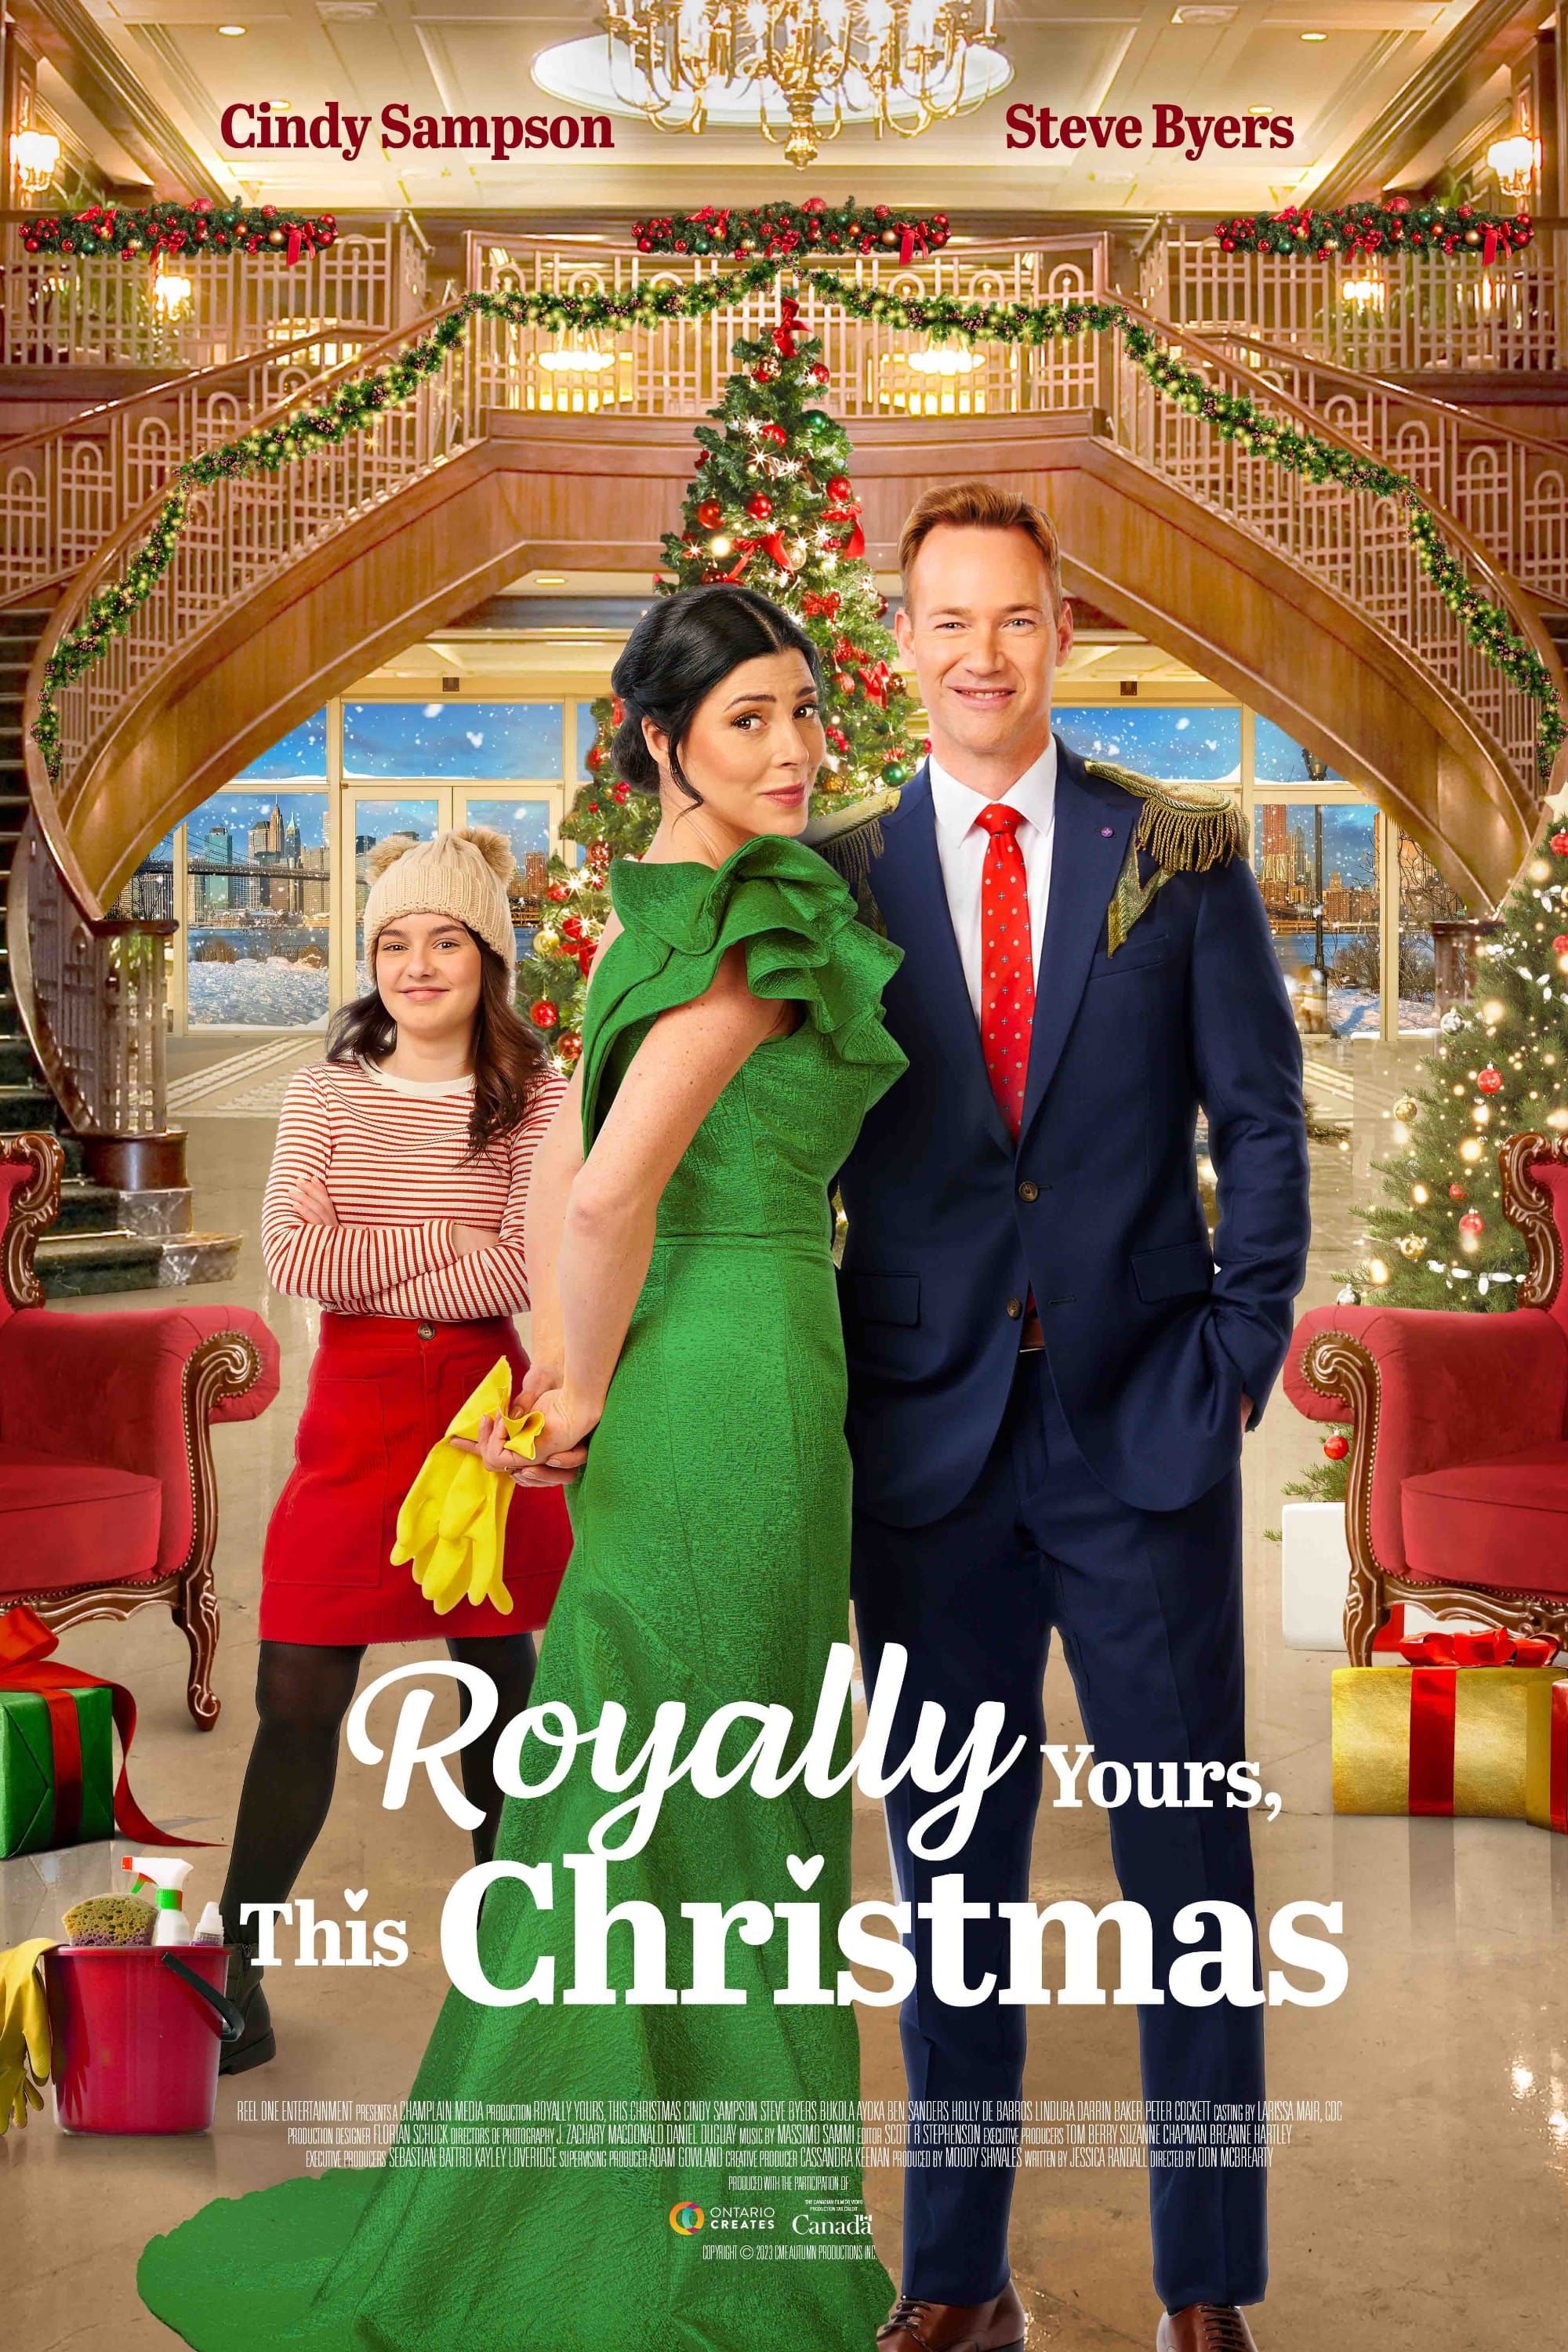 Royally Yours, This Christmas film